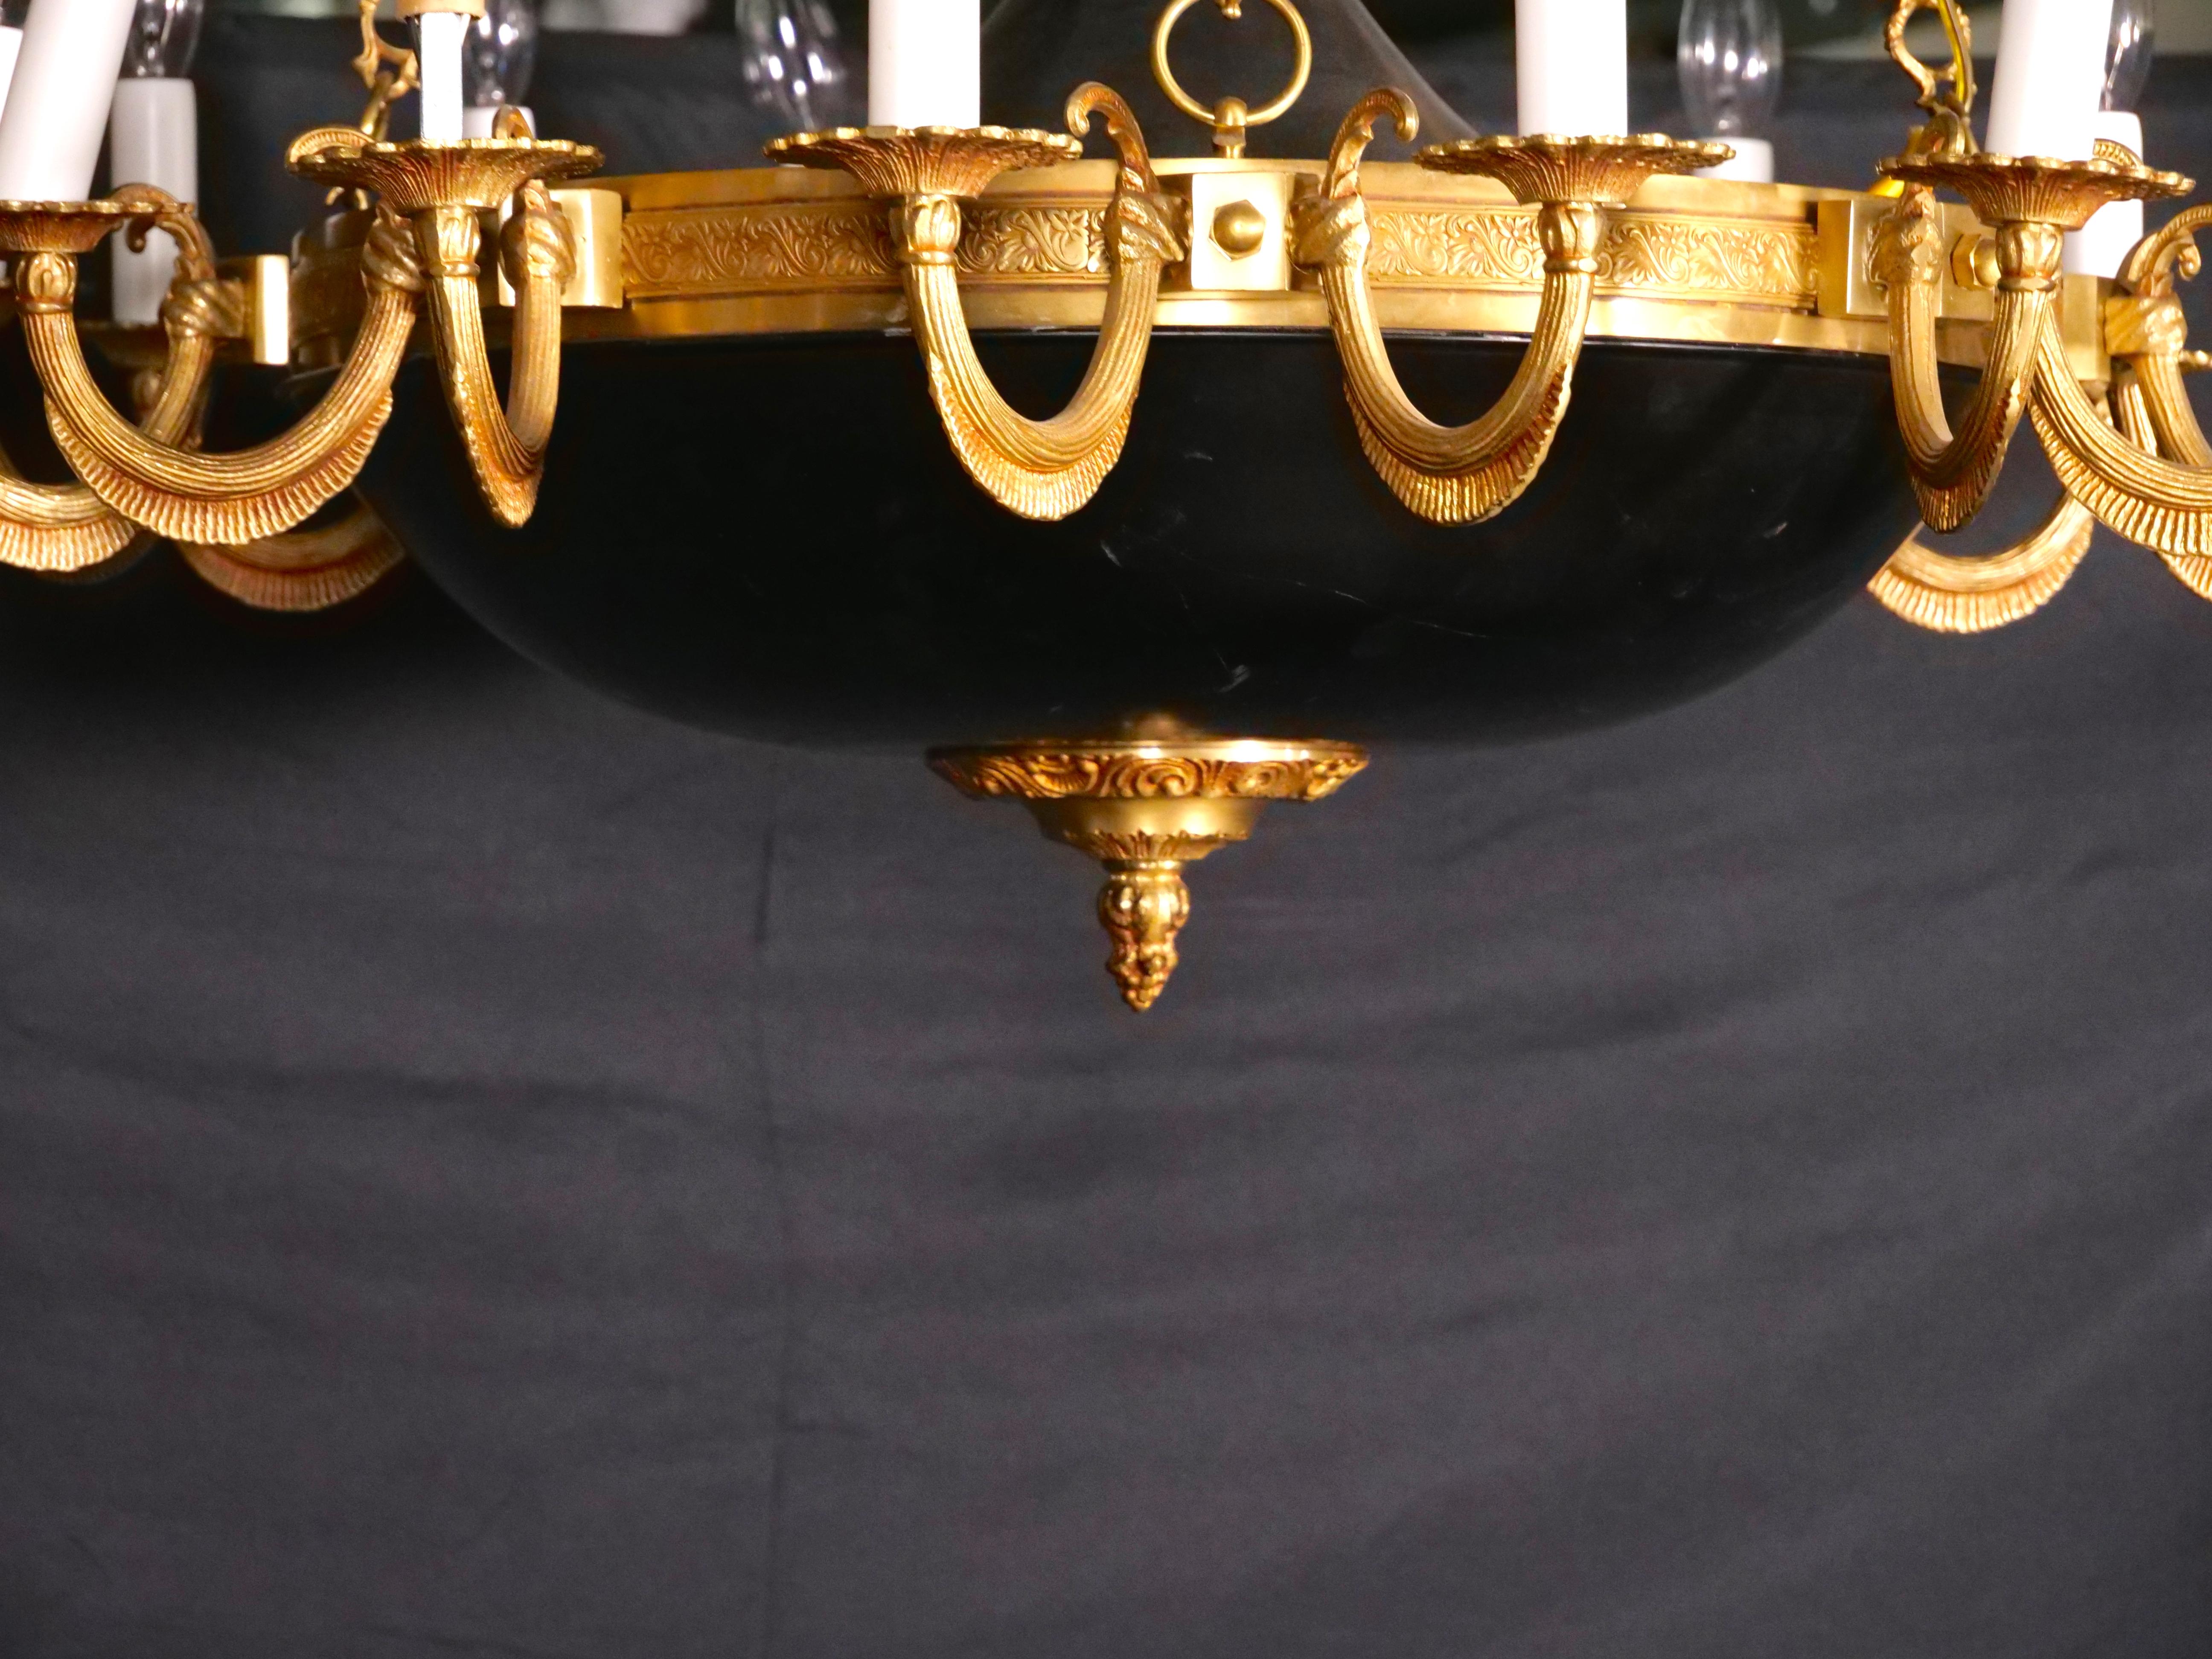 19th Century French Empire Style 24-Light Gilt Bronze / Patinated Chandelier For Sale 6